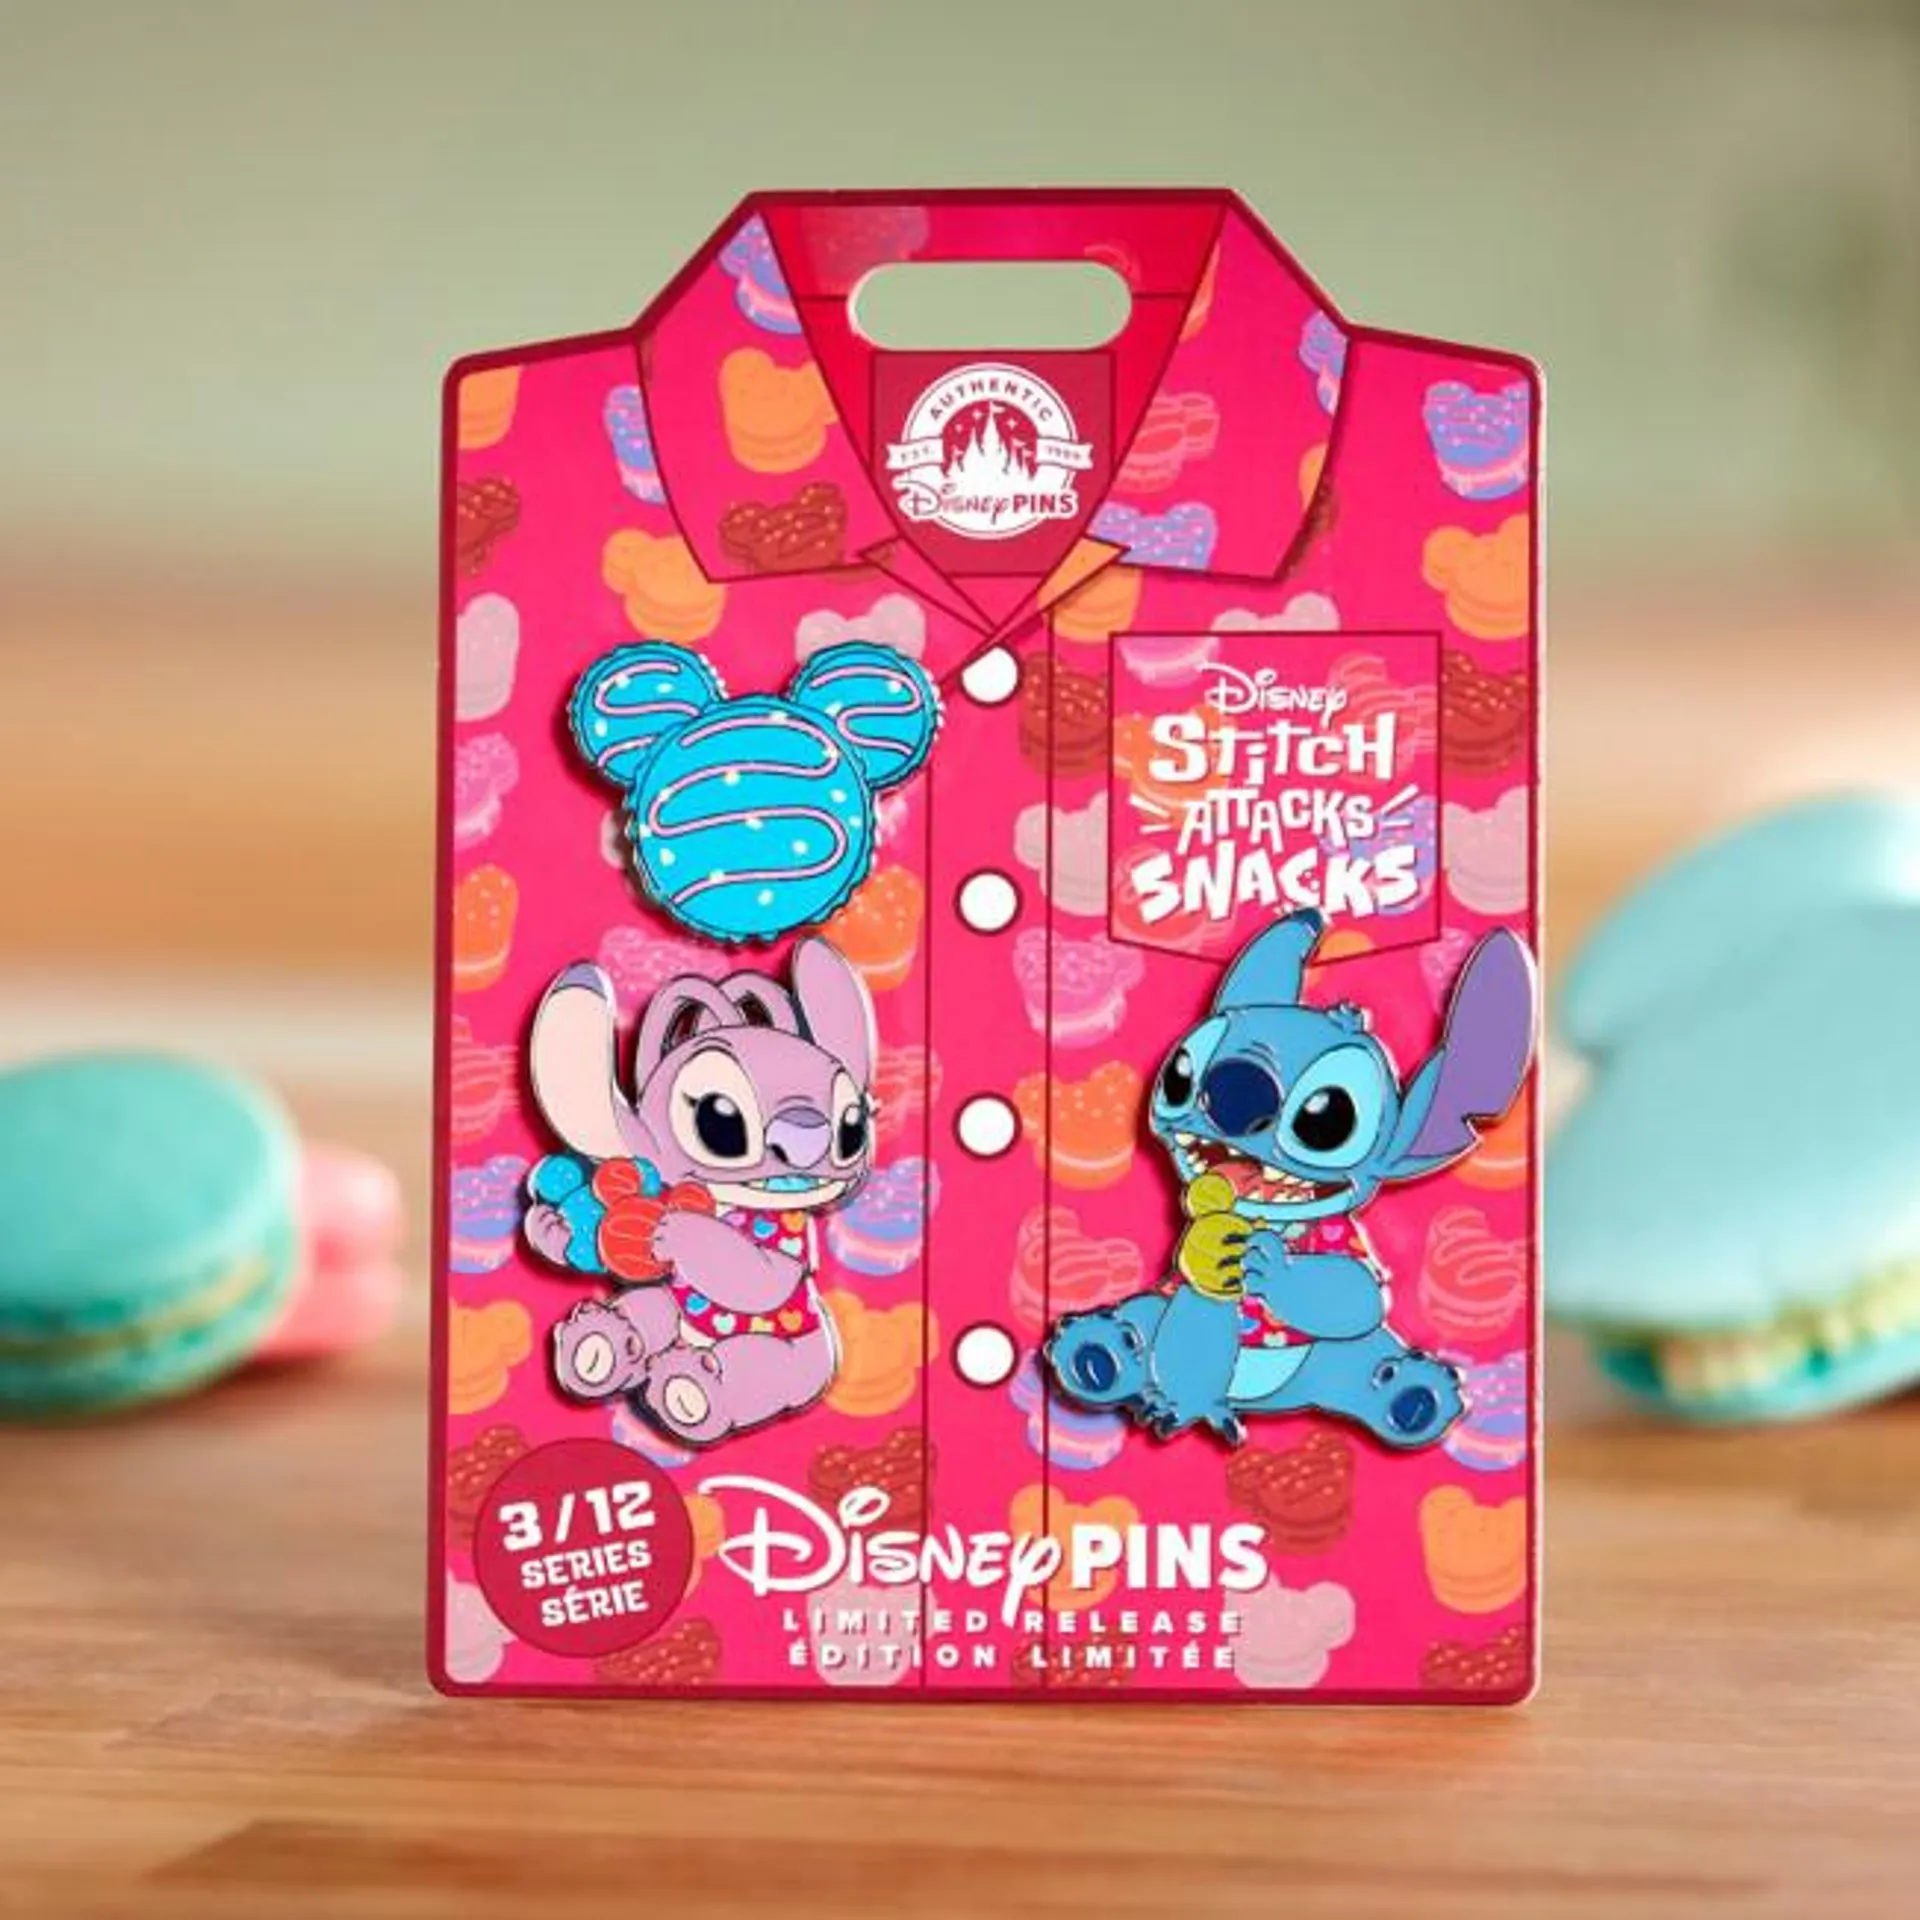 Stitch Attacks Snacks Limited Release Pin Set, Macaron, March